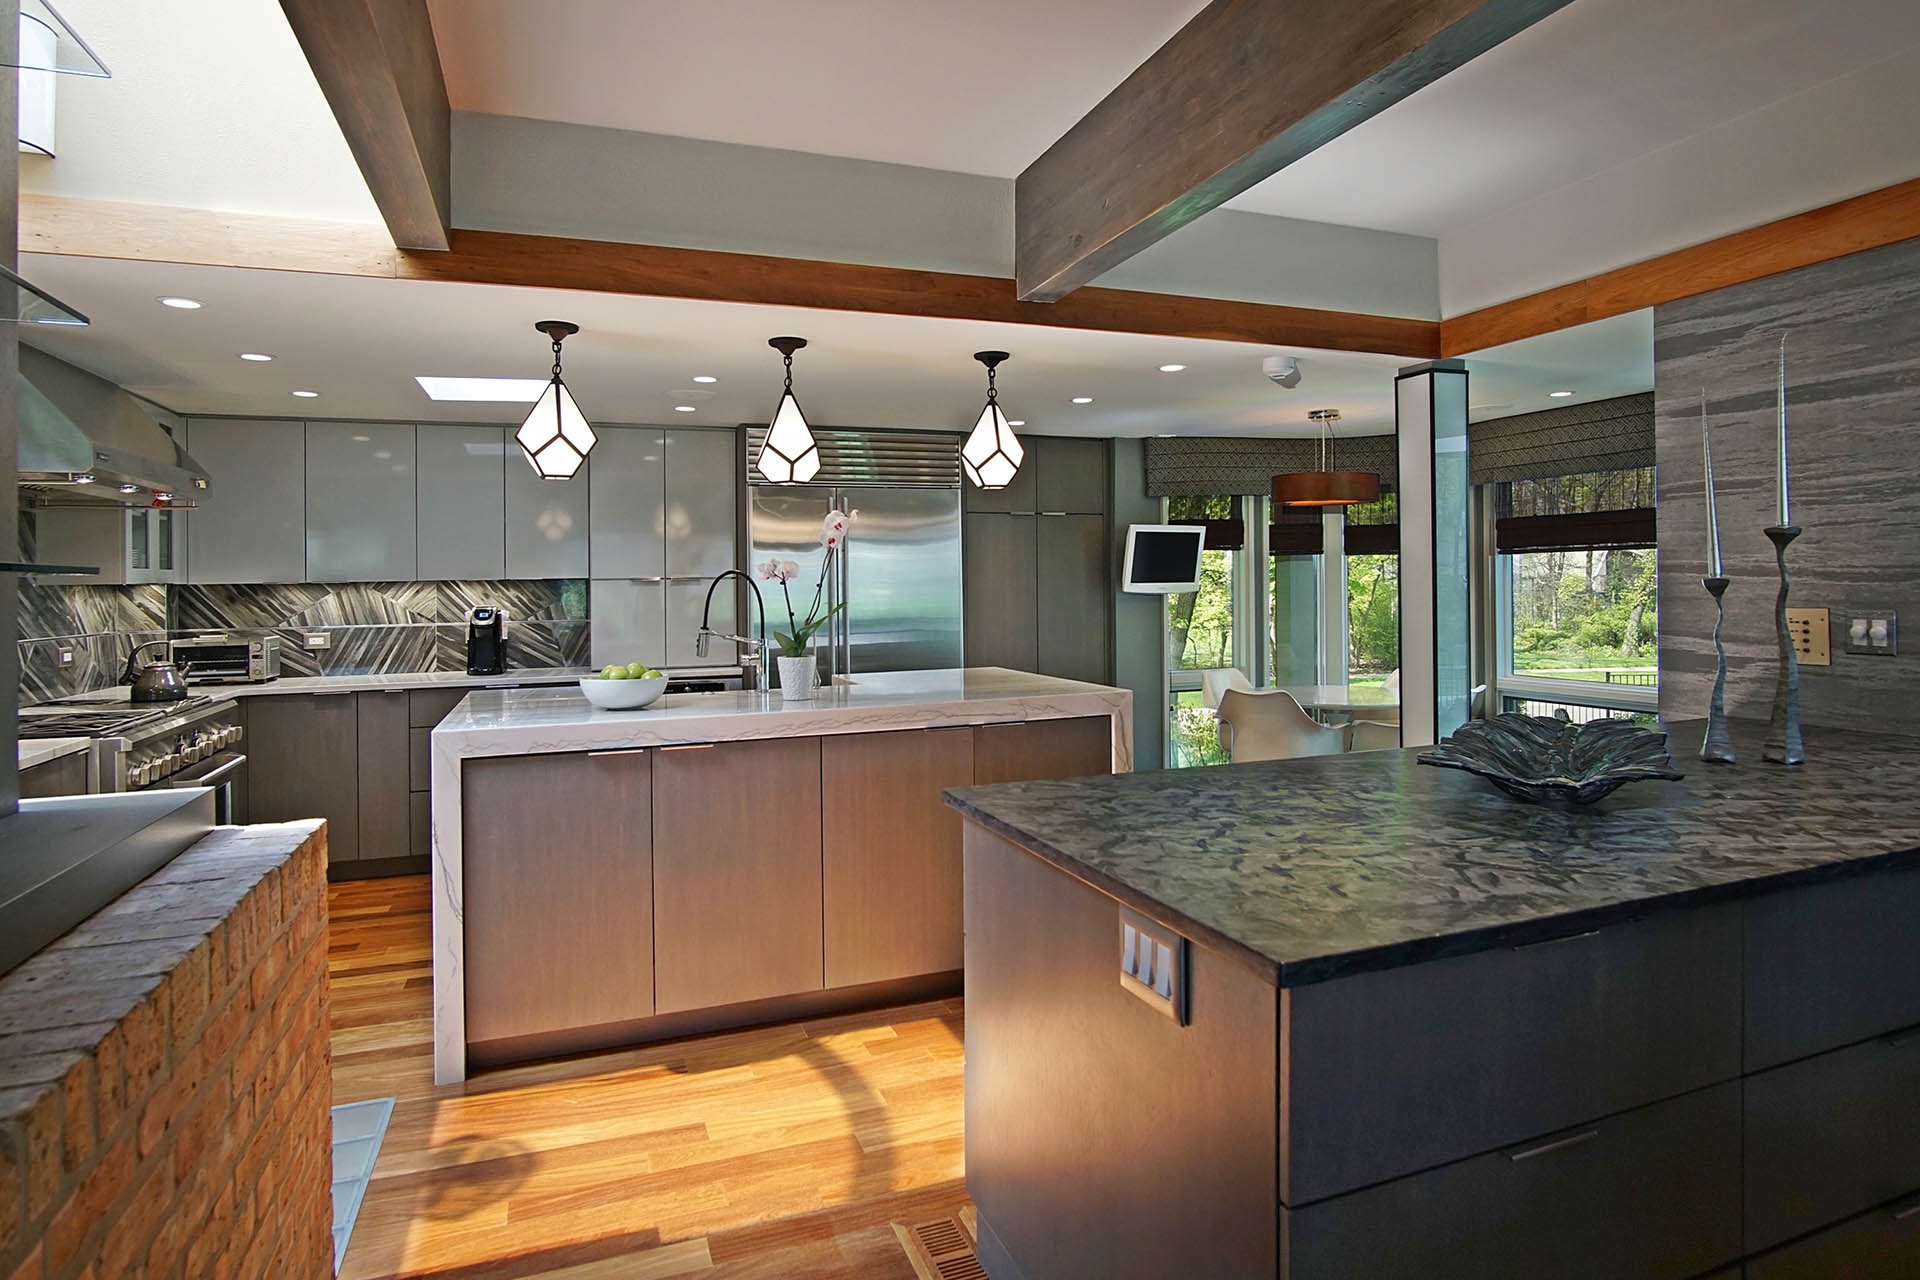 Fabulous two tone kitchen cabinets combined with big eating area in Lake Forest